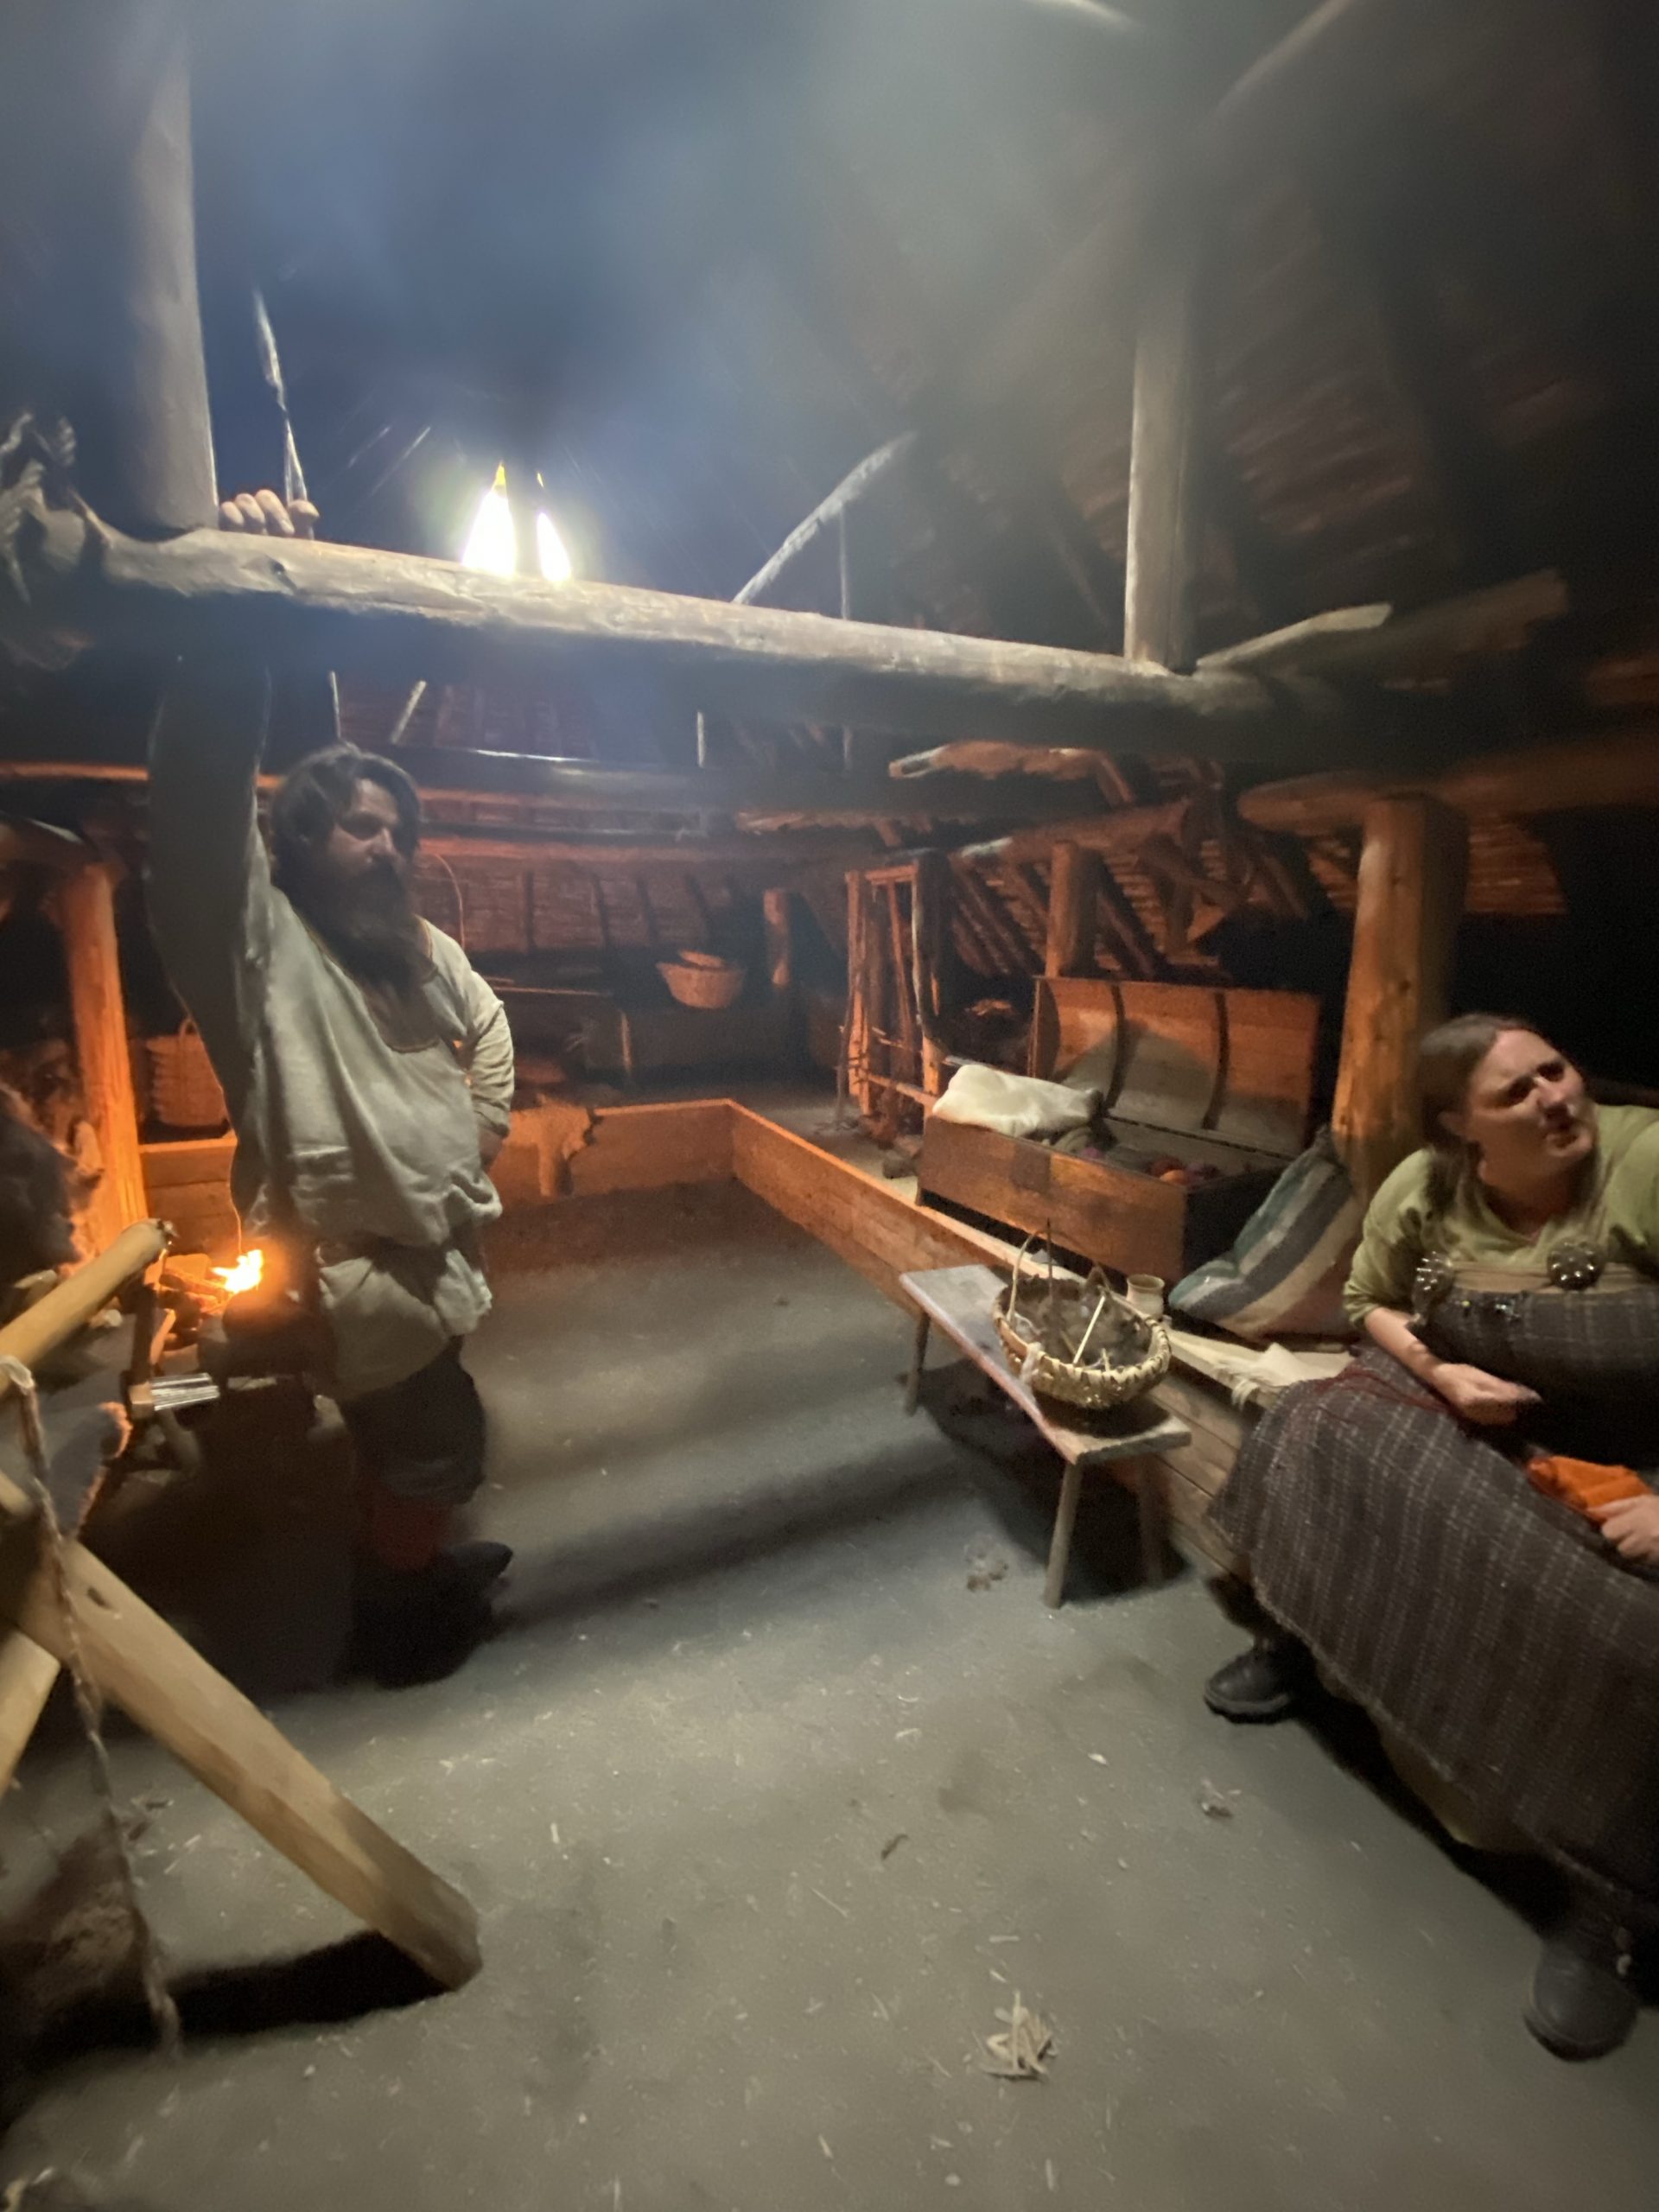 A Women’s Work Room in a recreation of a 1,000 year old Norse sod house.